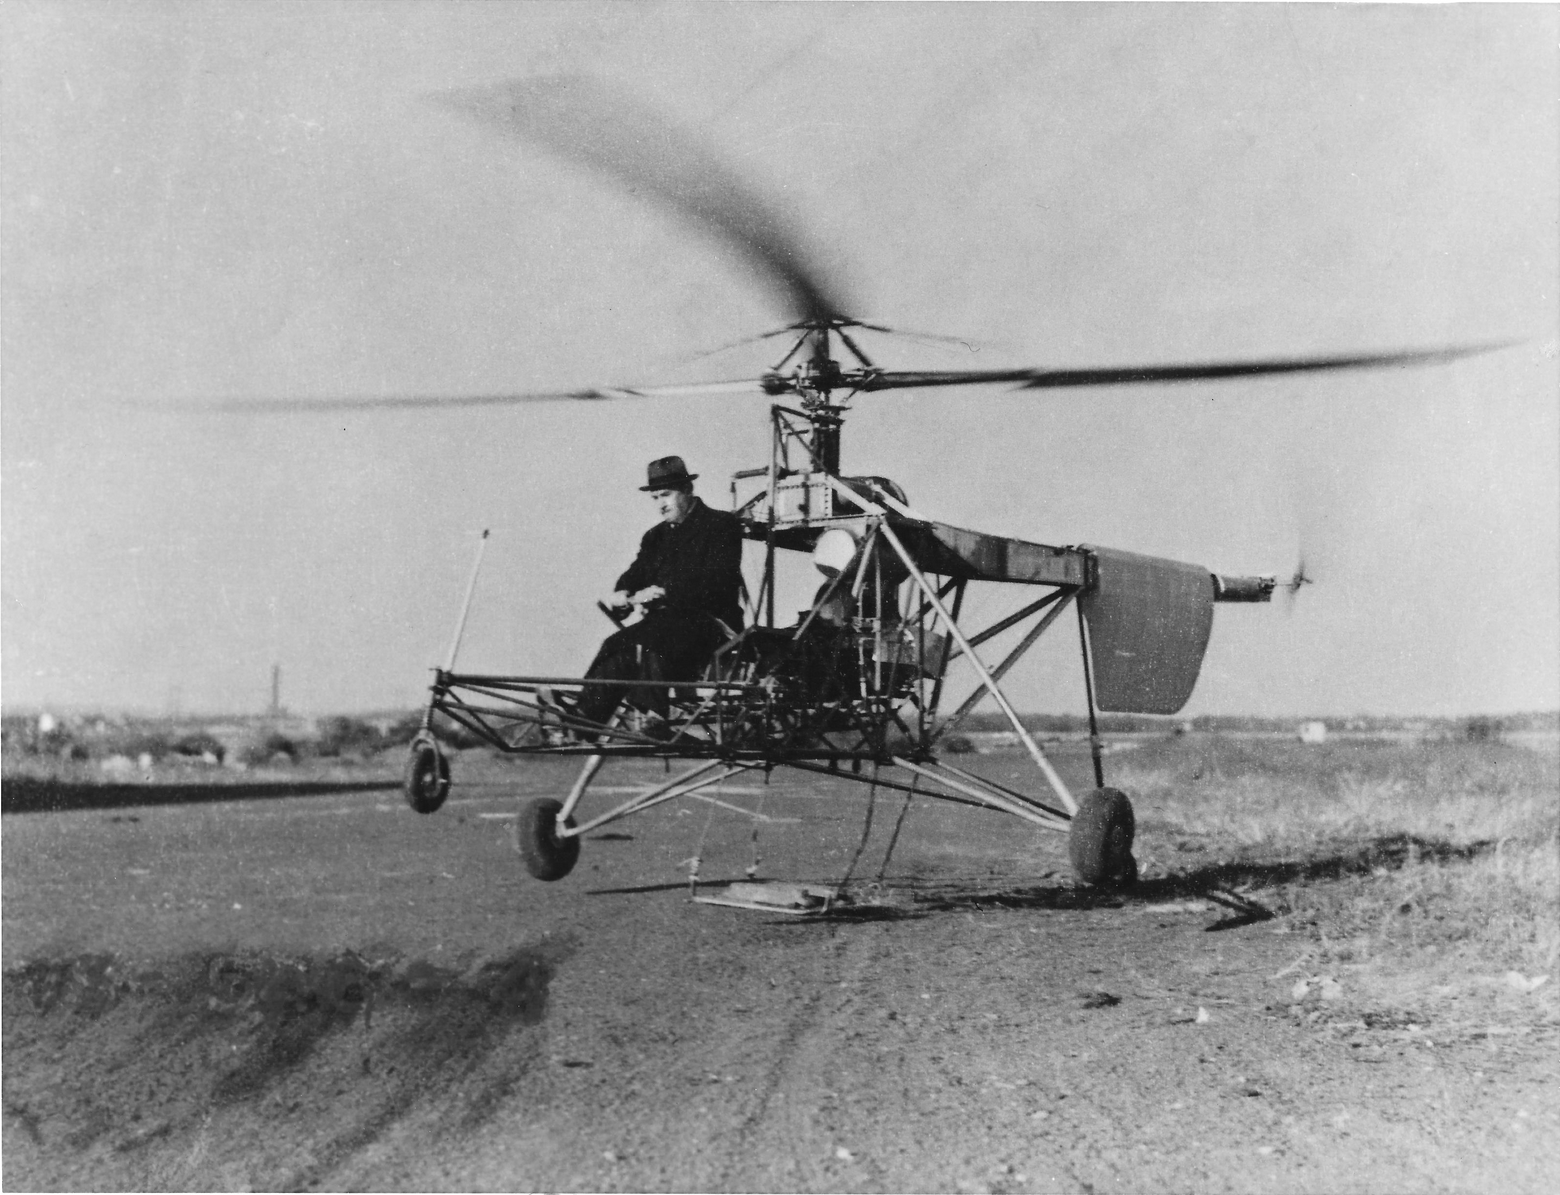 The prototype VS-300 helicopter clears the ground for the first time, 14 September 1939. Igor Sikorsky is at the controls. (Sikorsky Historical Archives)